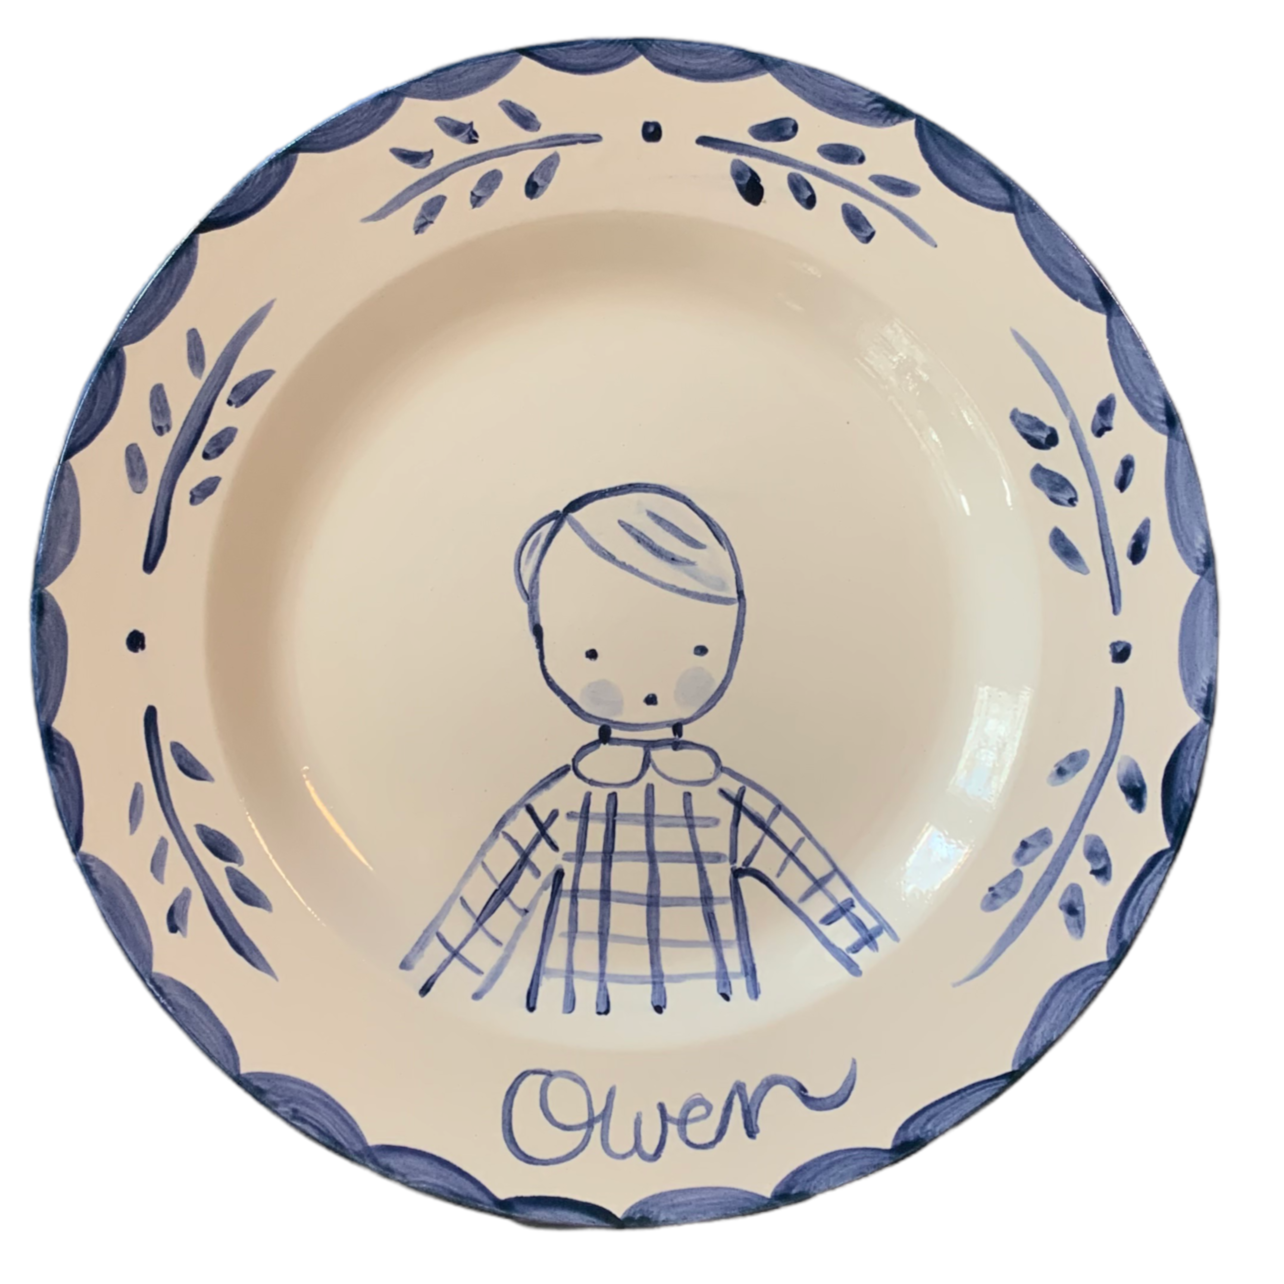 Simple Boy's Plate (blue and white) - Premium  from Tricia Lowenfield Design 